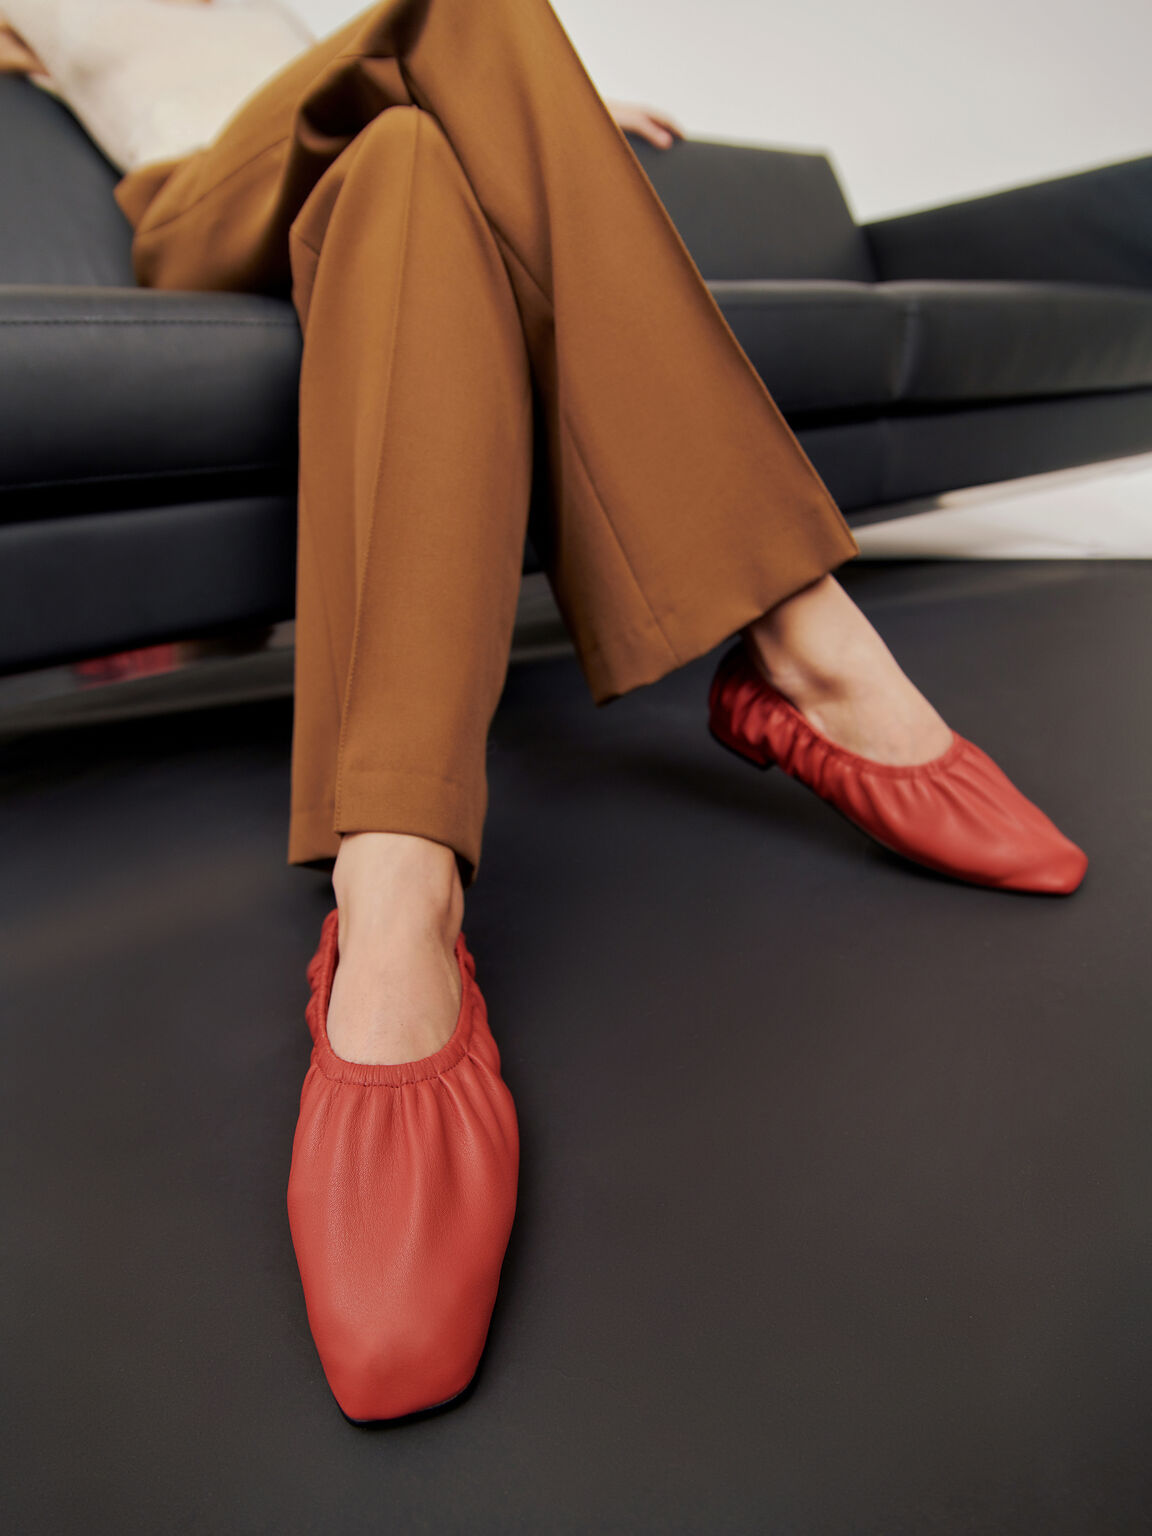 Ruched Leather Flats, Brick